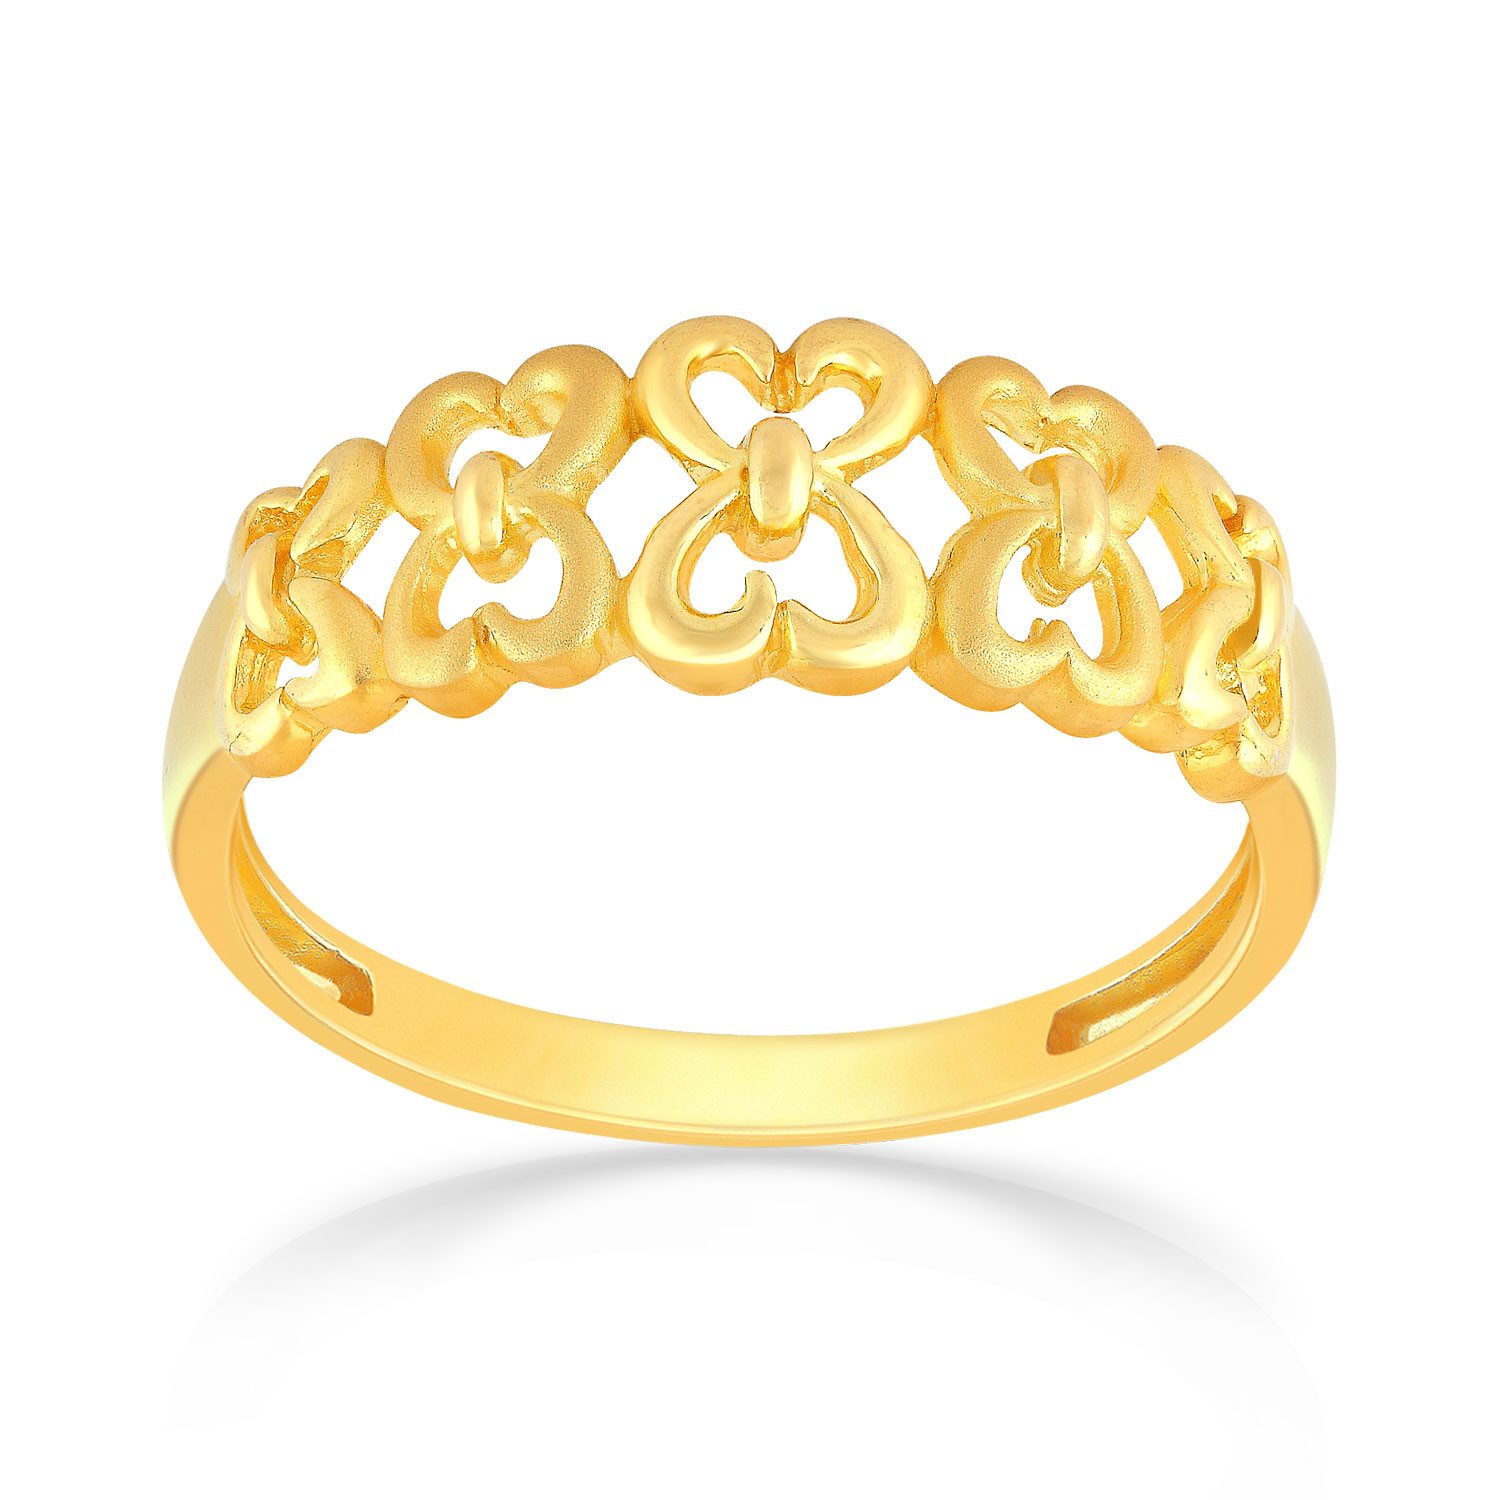 AD Ladies Gold Ring at Rs 5958.4 in New Delhi | ID: 18660546155